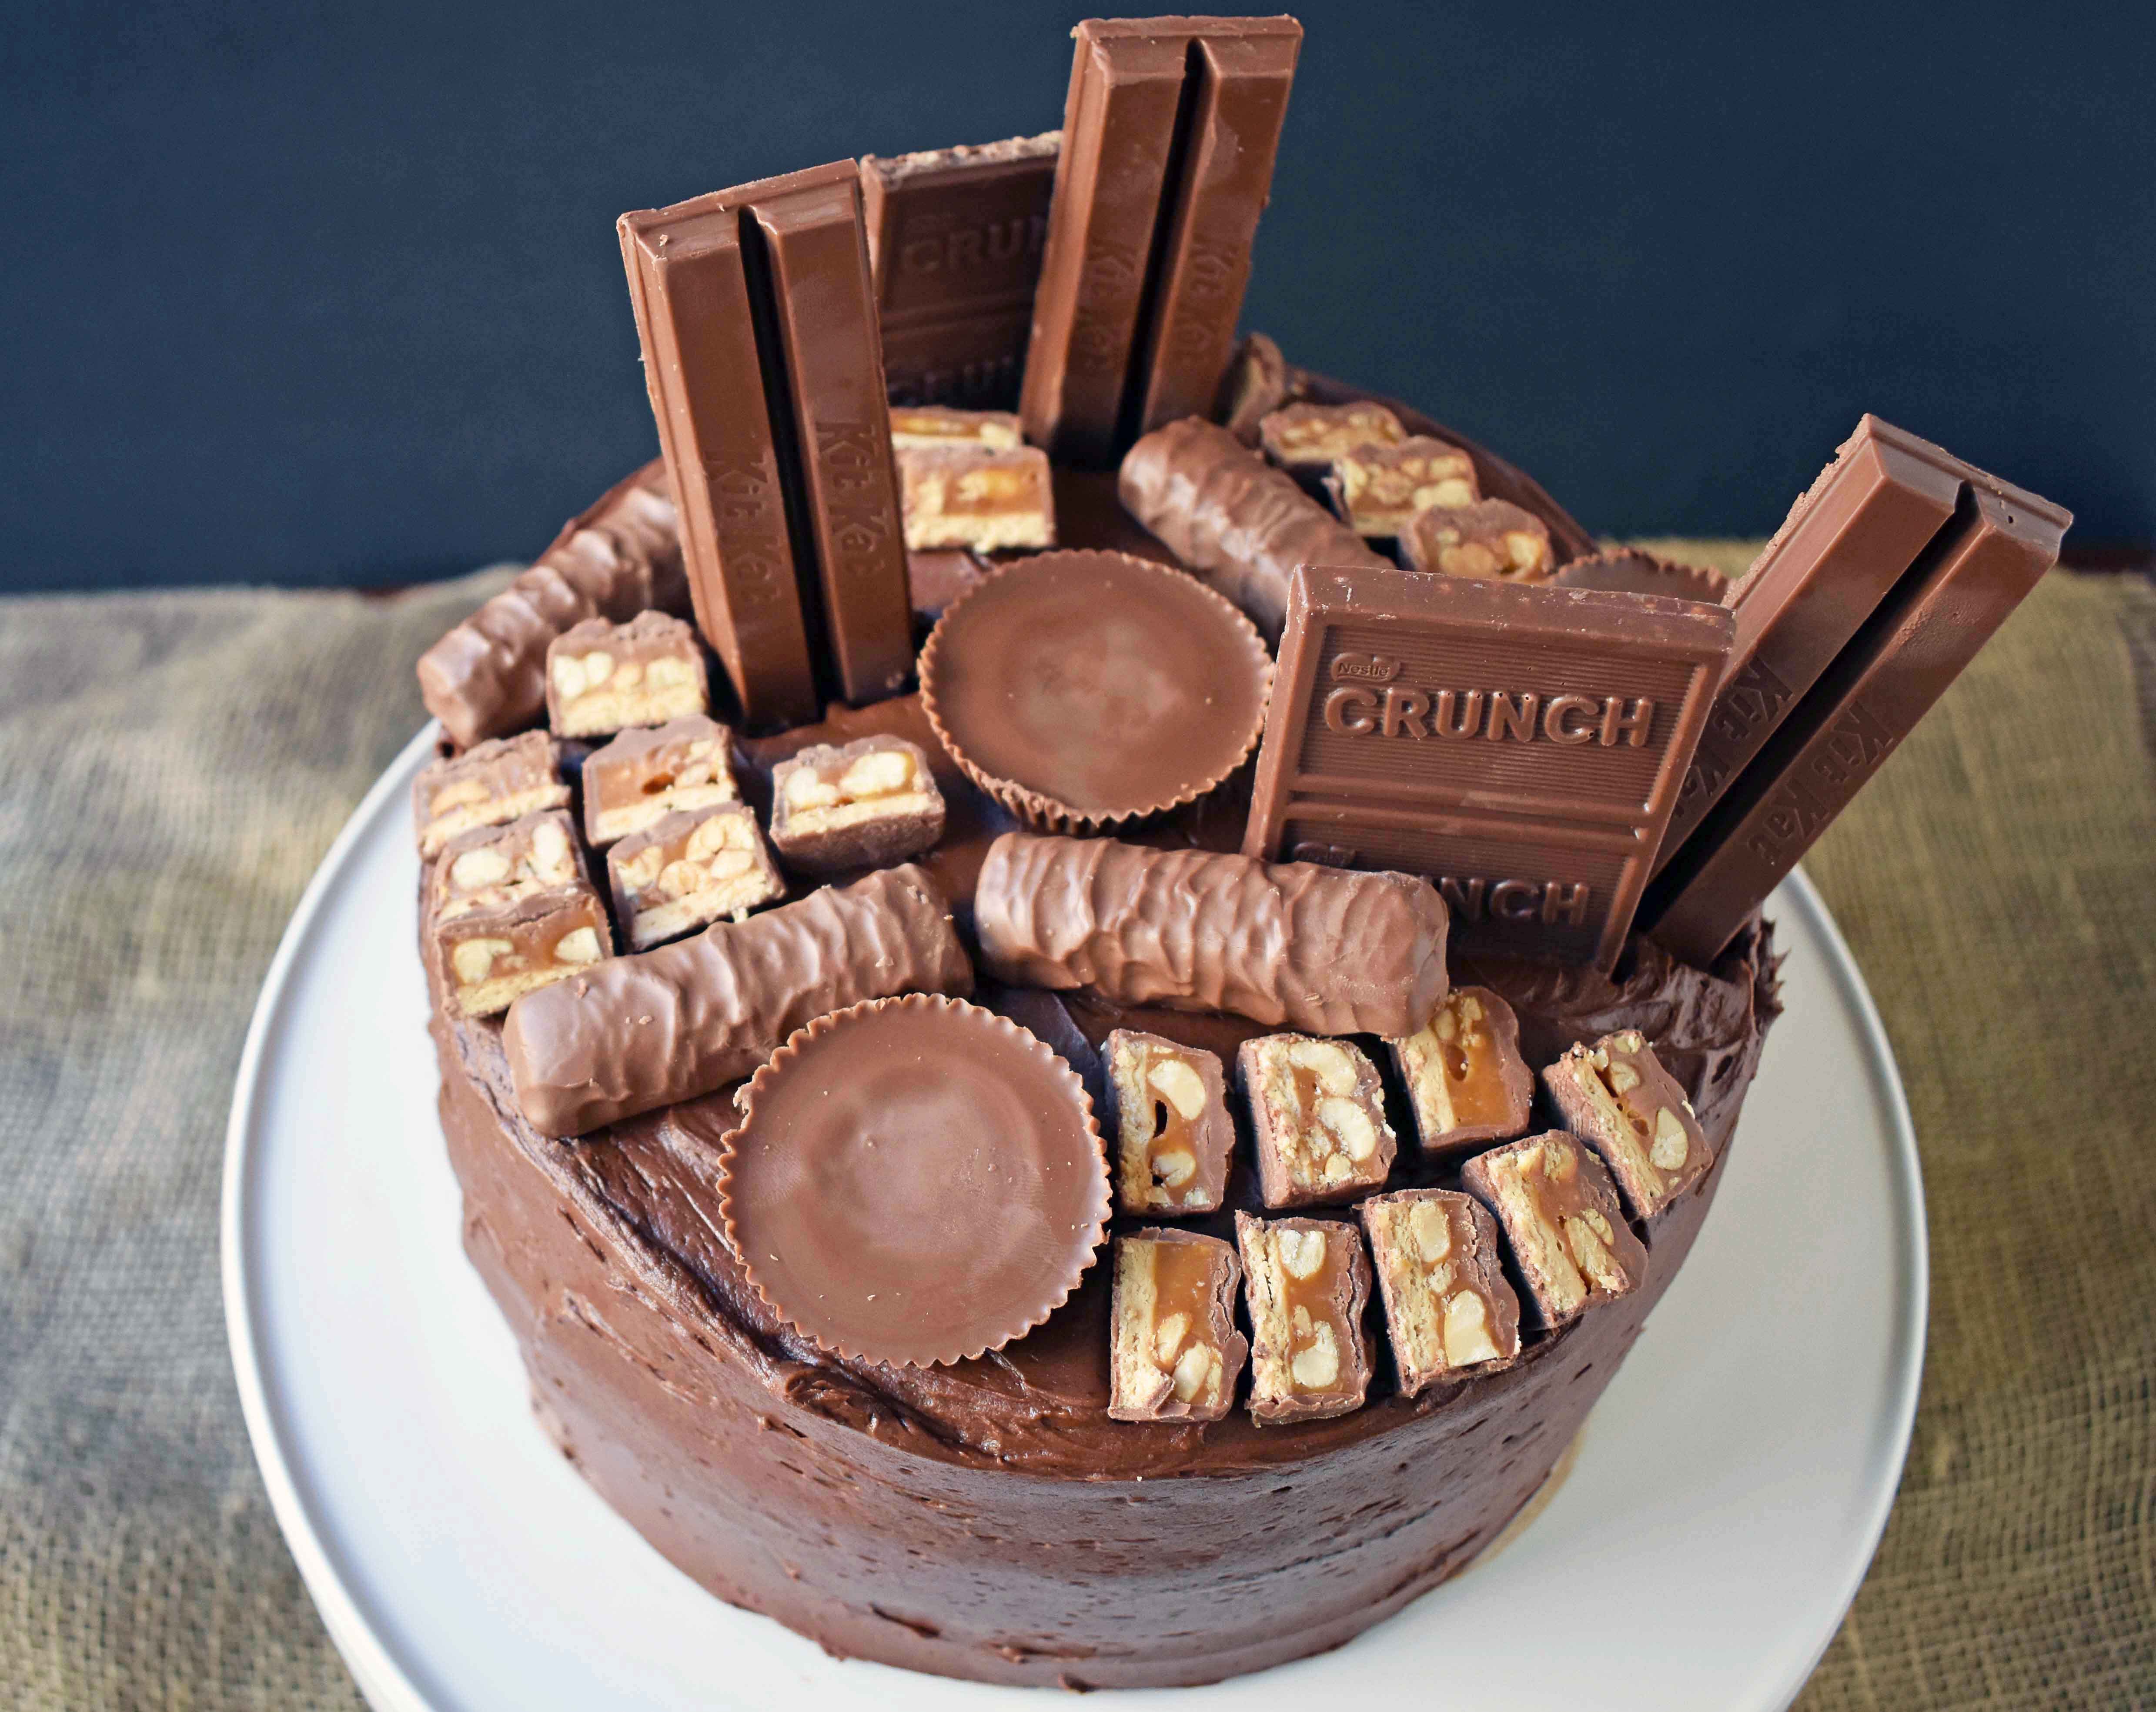 Candy Bar Stash Chocolate Cake by Modern Honey. Perfect chocolate cake topped with chocolate buttercream and the most popular candy bars. It's the ultimate Chocolate Candy Bar Cake.